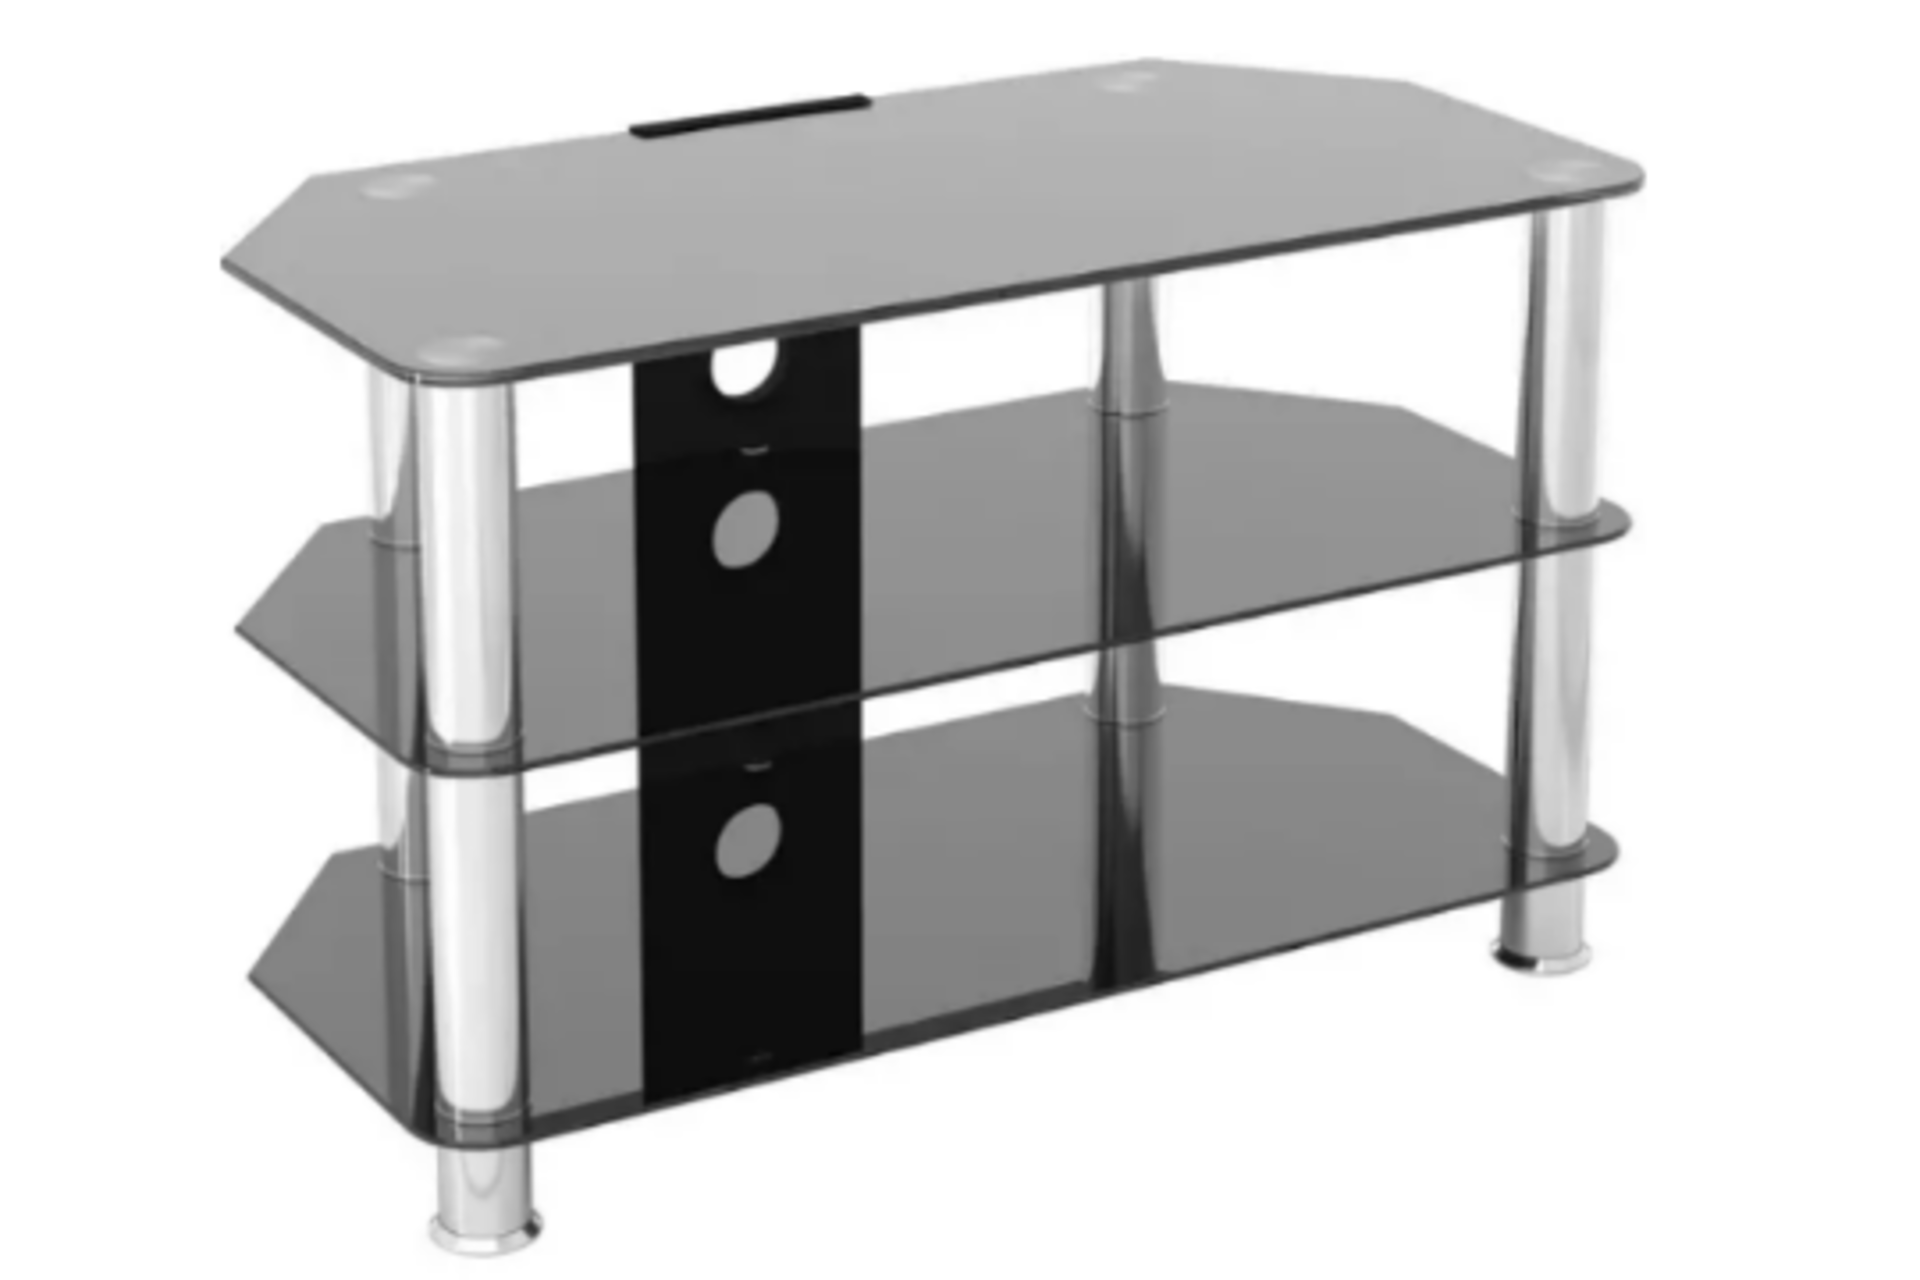 2 x NEW LIVING GLASS TV STANDS. BLACK TEMPERED GLASS WITH STAINLESS STEEL LEGS. EASY TO ASSEMBLE. - Image 2 of 3